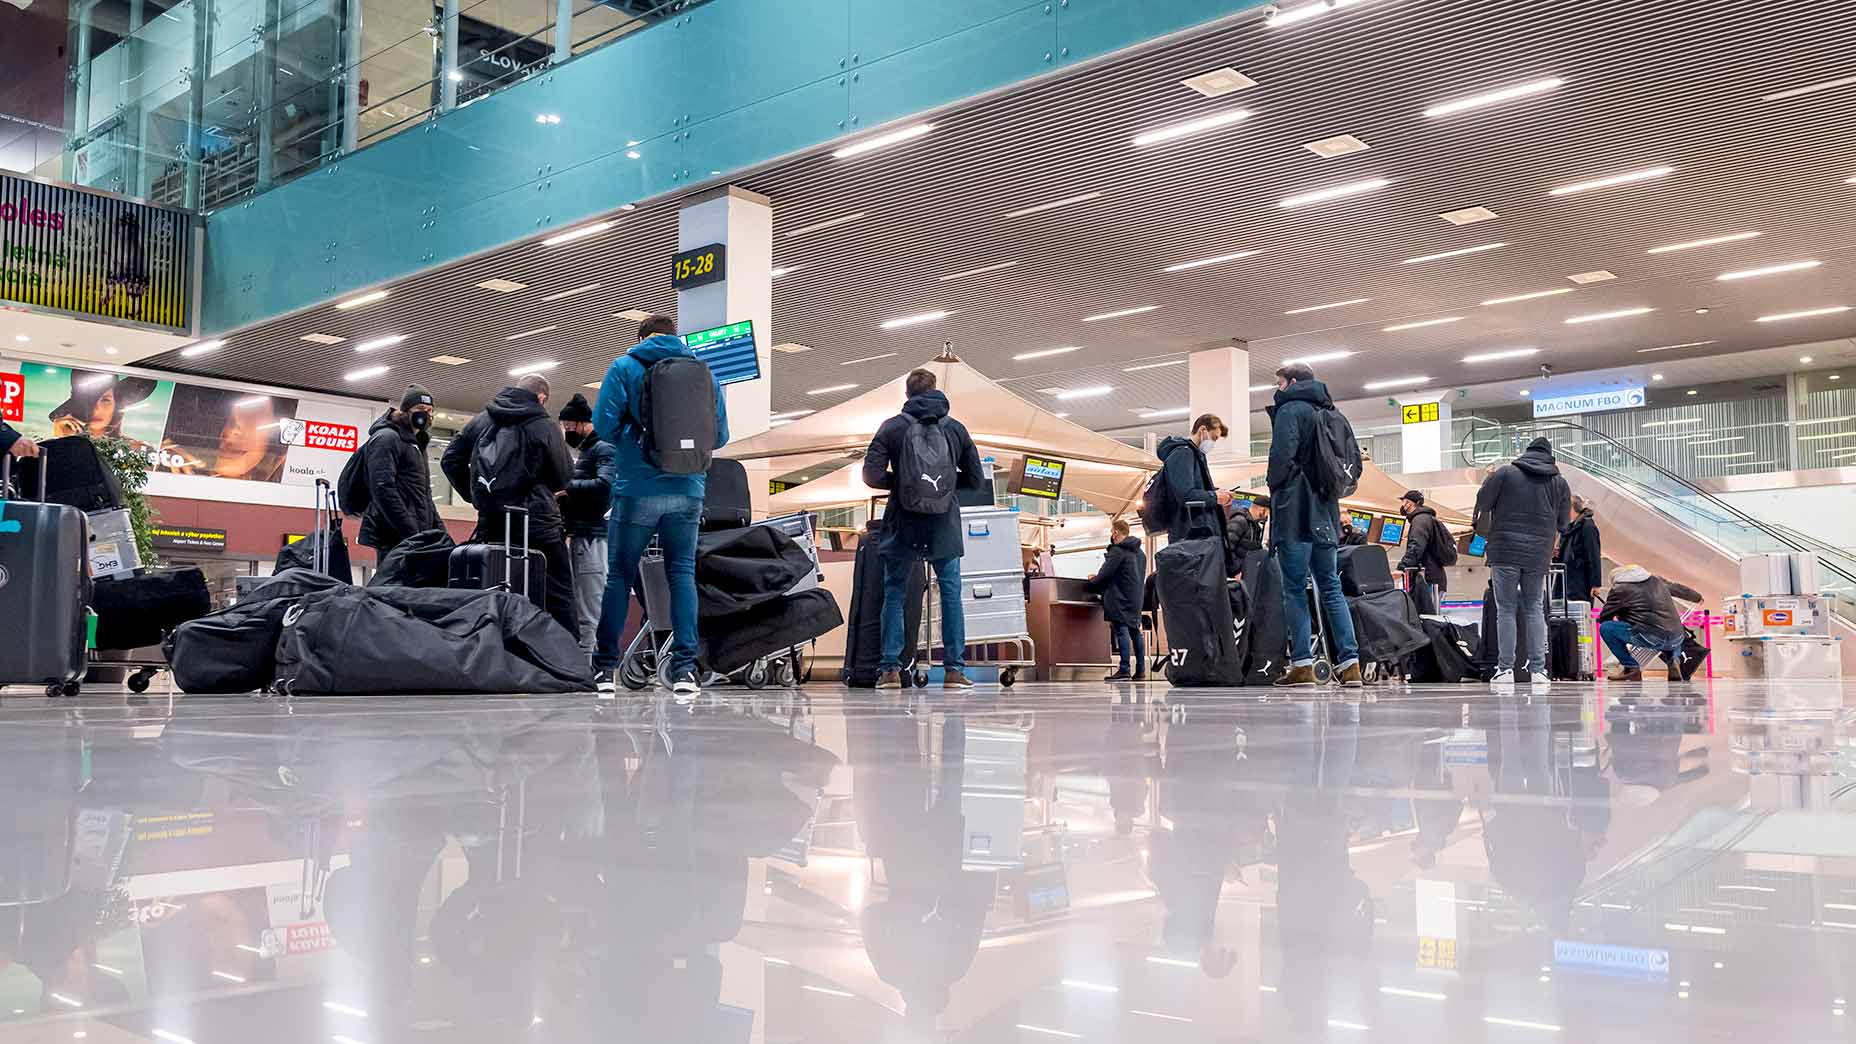 Carousel or oversized baggage? Tips to find your golf bag at the airport